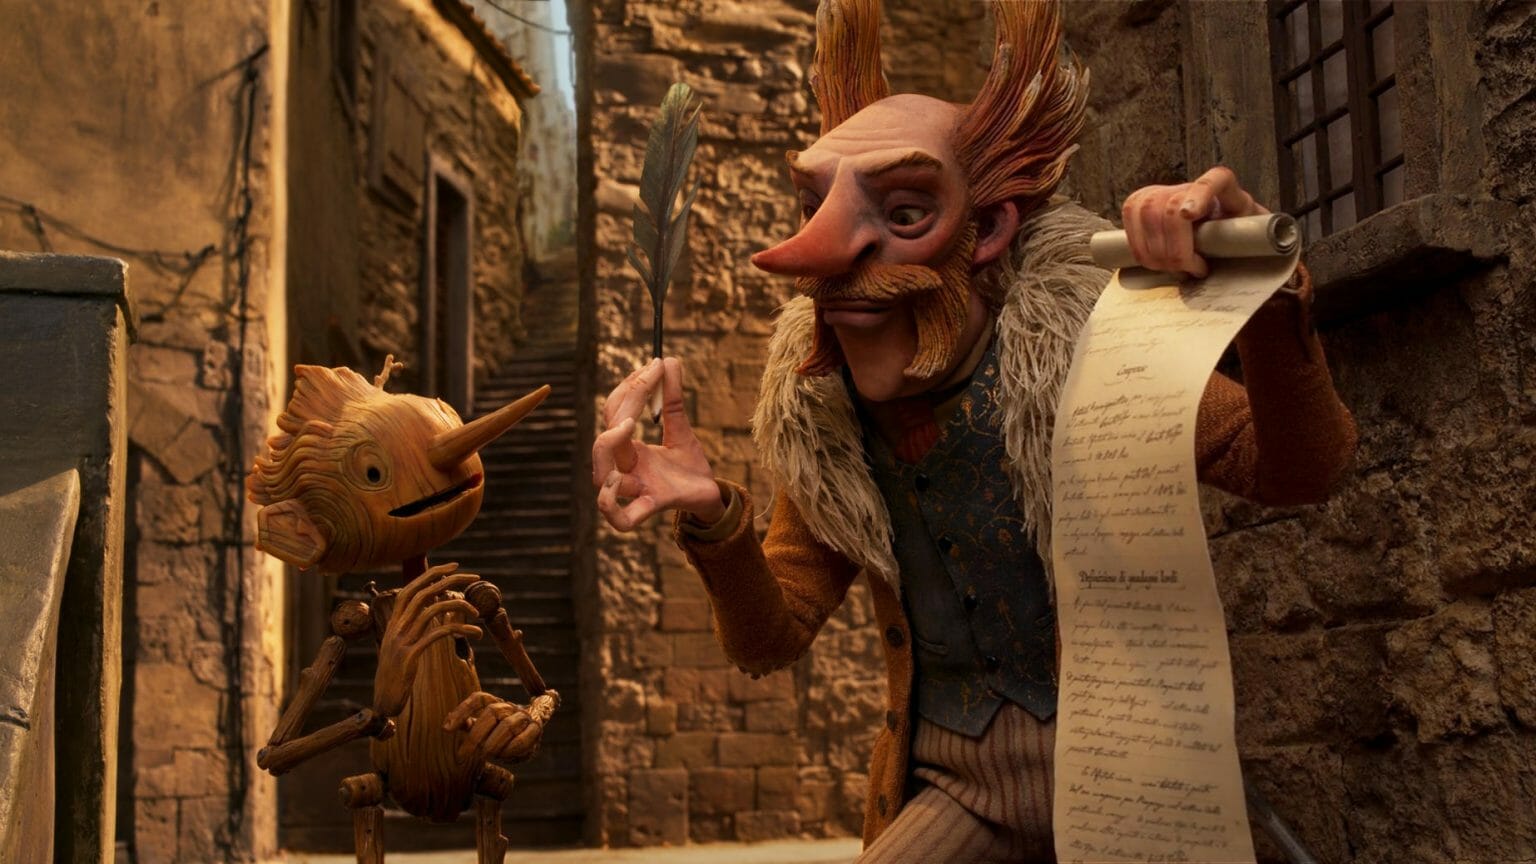 Pinocchio the small wooden boy meets Count Volpe on the streets of fascist Italy and is presented a long contract to sign with an ink feather in the Netflix stop motion animated film GUILLERMO DEL TORO"S PINOCCHIO.